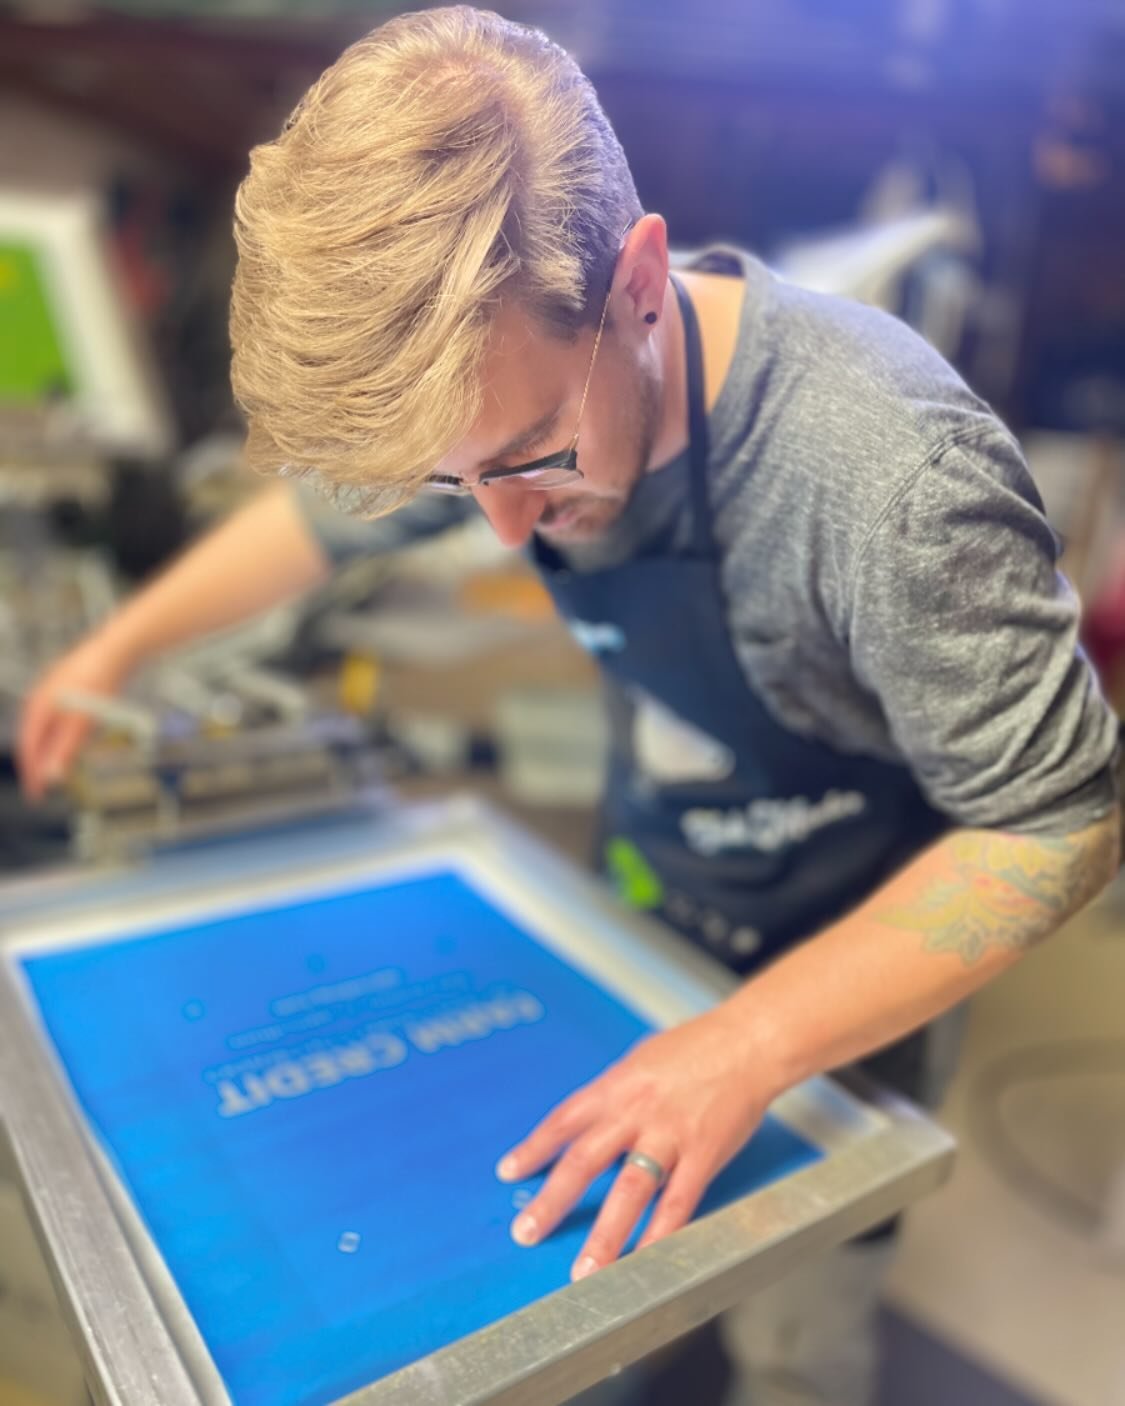 👋🏻 Hey everyone, it&rsquo;s Josh! I&rsquo;ve been passionate about screen printing since 2006, when I got my first press. After many years as an art educator, I&rsquo;ve decided start a new chapter and move into screen printing full-time. It&rsquo;